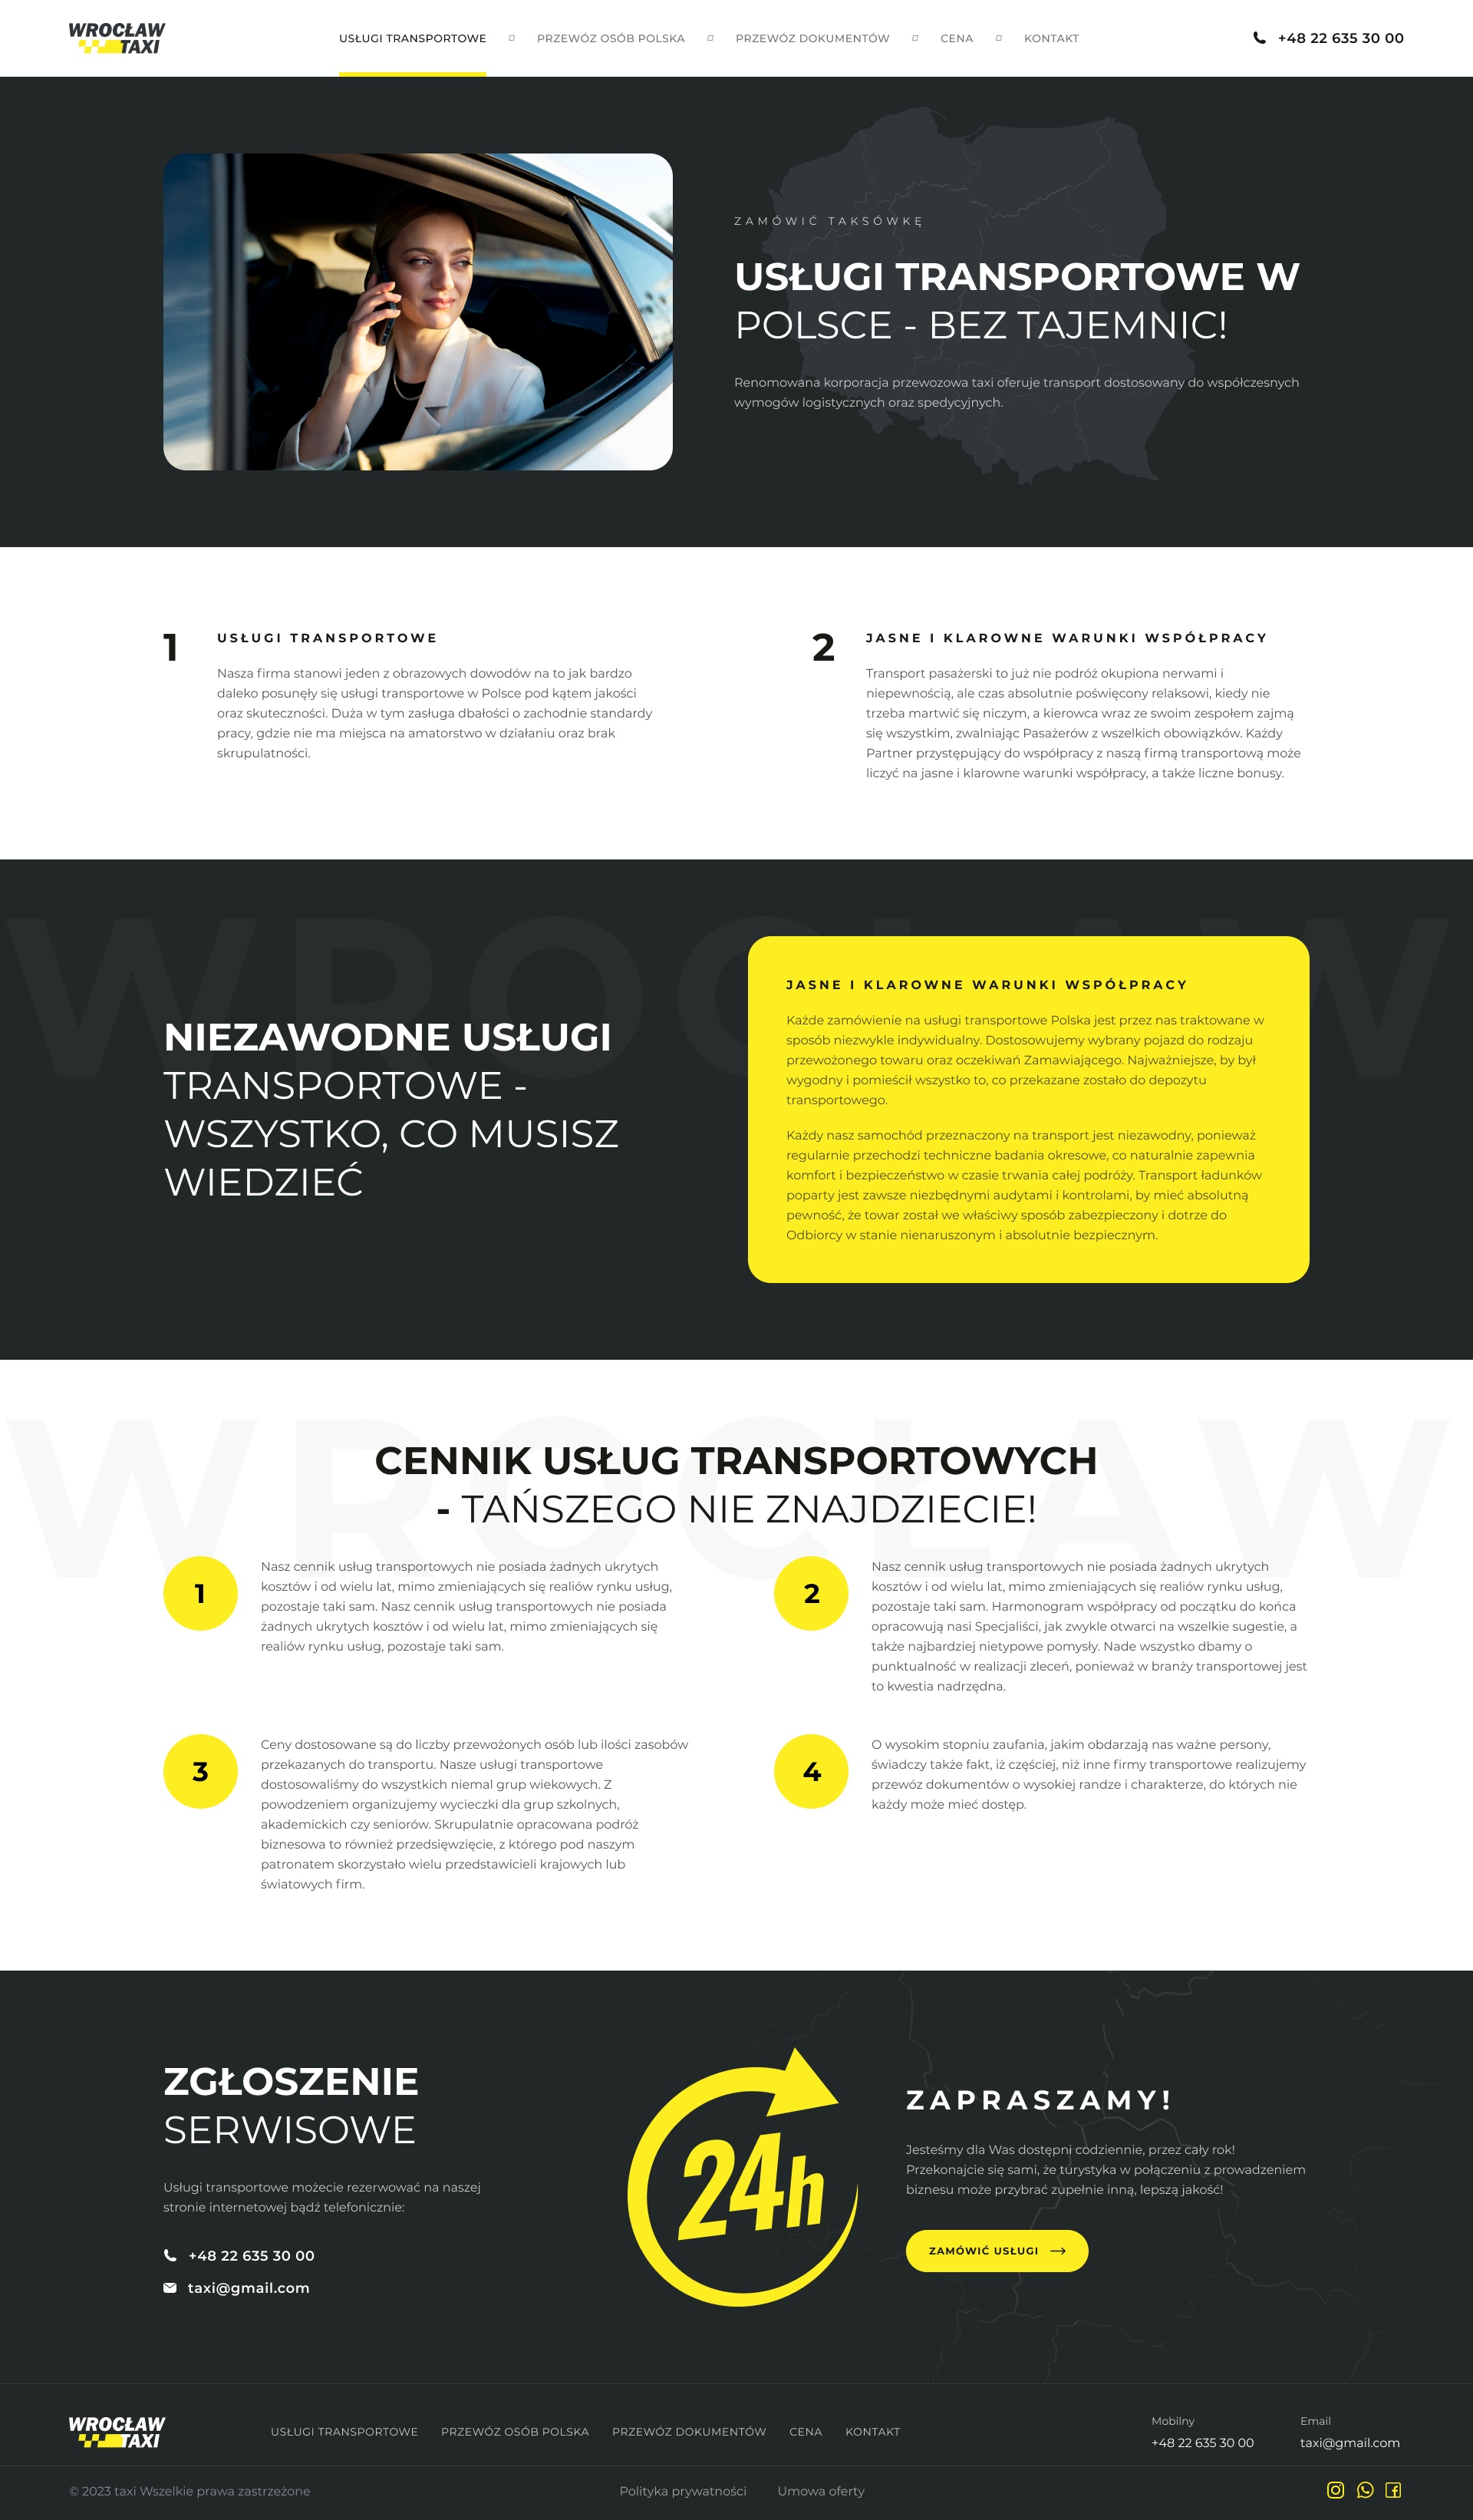 Taxi Wrozlaw_02_Transport_Services_0.1-sq